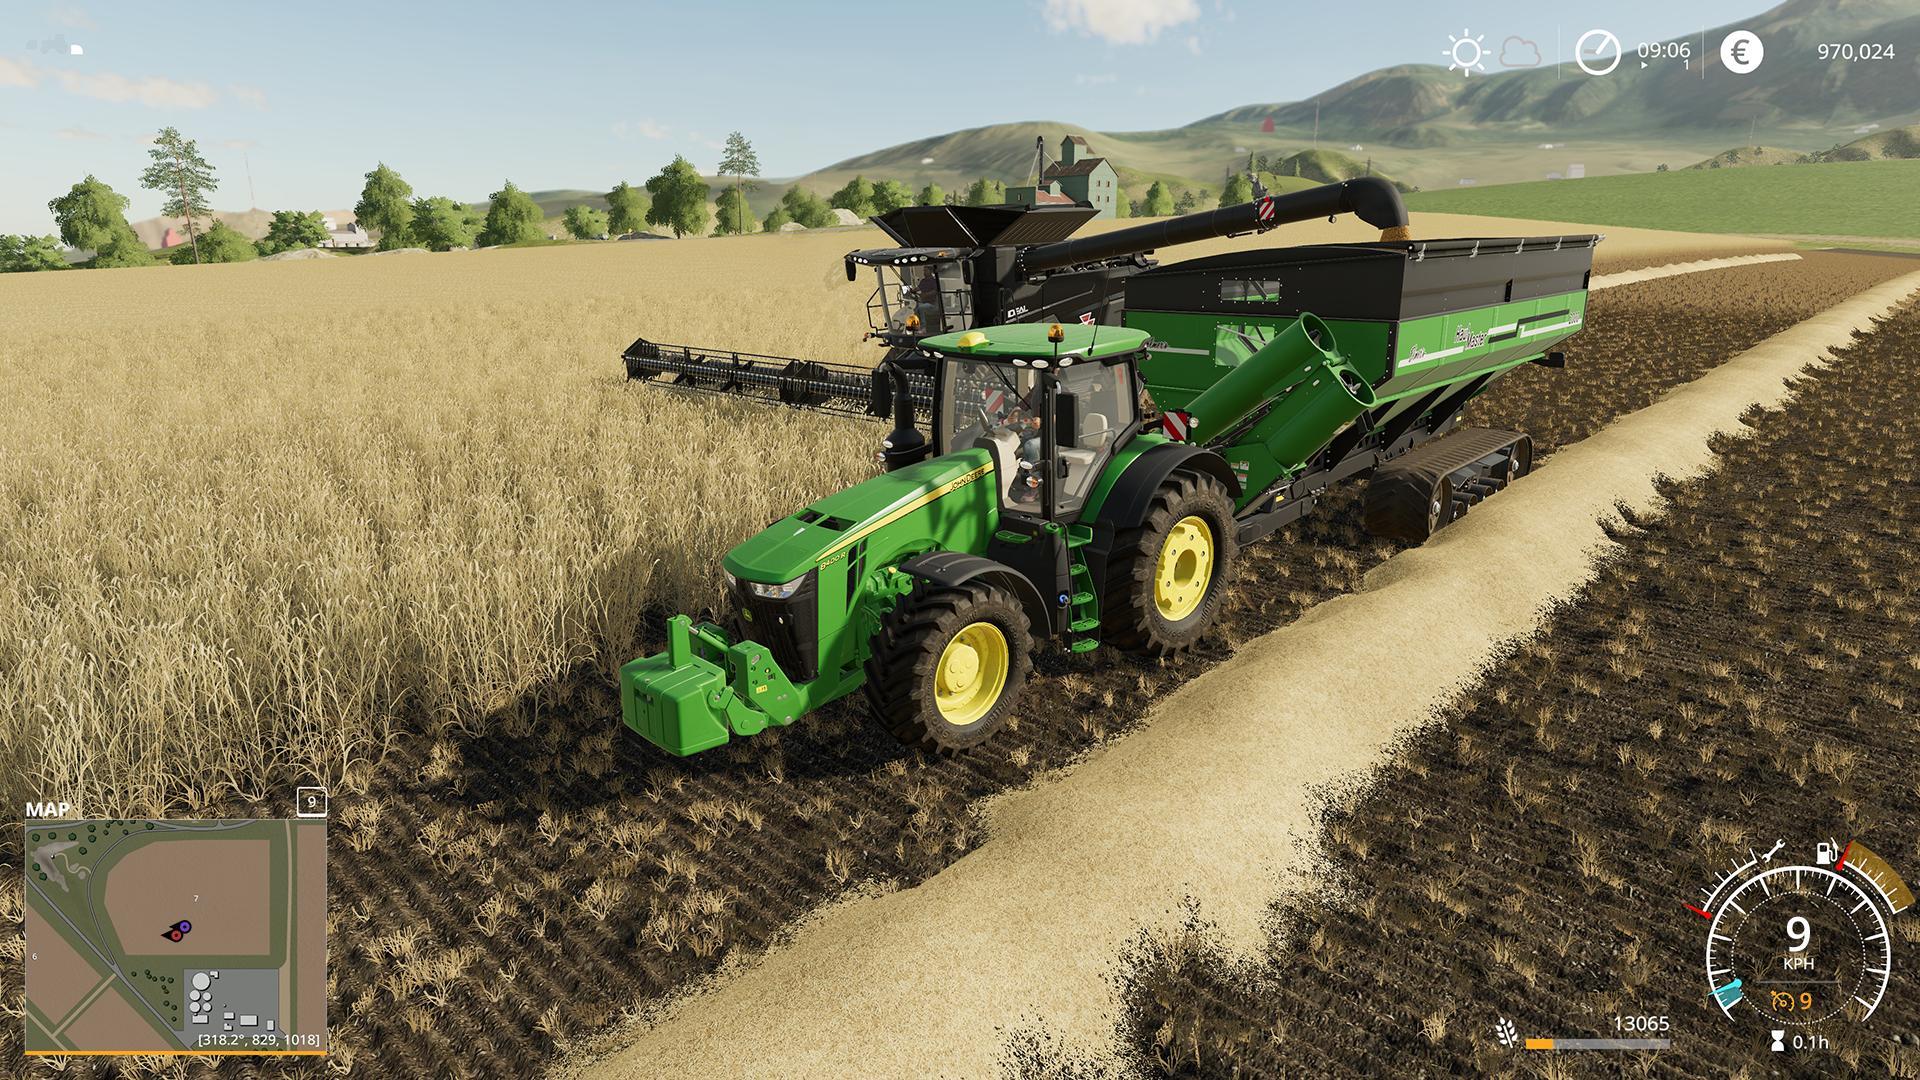 Farming Simulator 2019 announced New Mission System in game